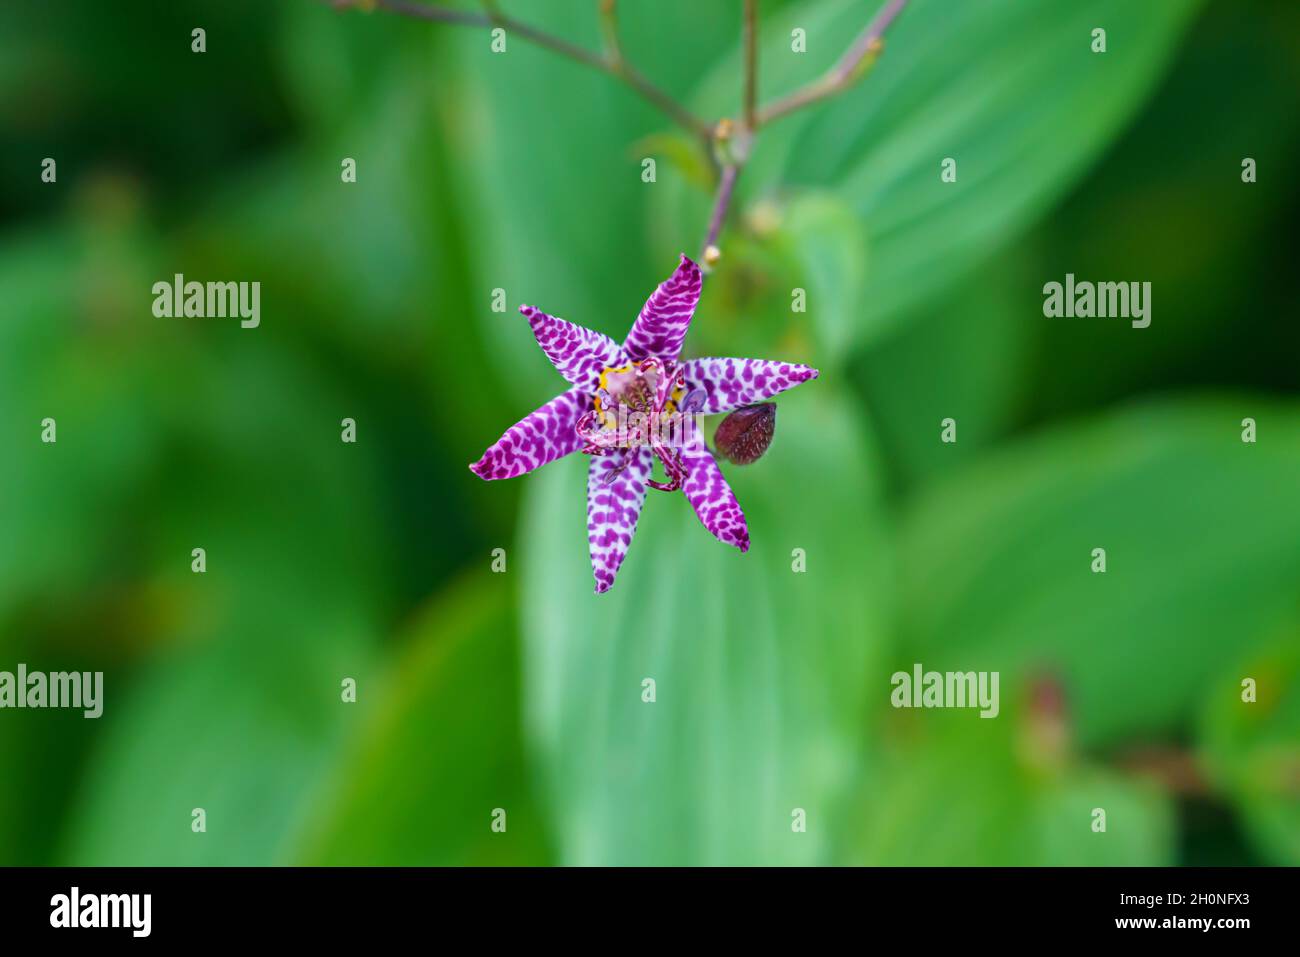 closeup of the beautiful and unusal spotted Japanese Toad Lily (Tricyrtis Hirta) with purple-white flower Stock Photo